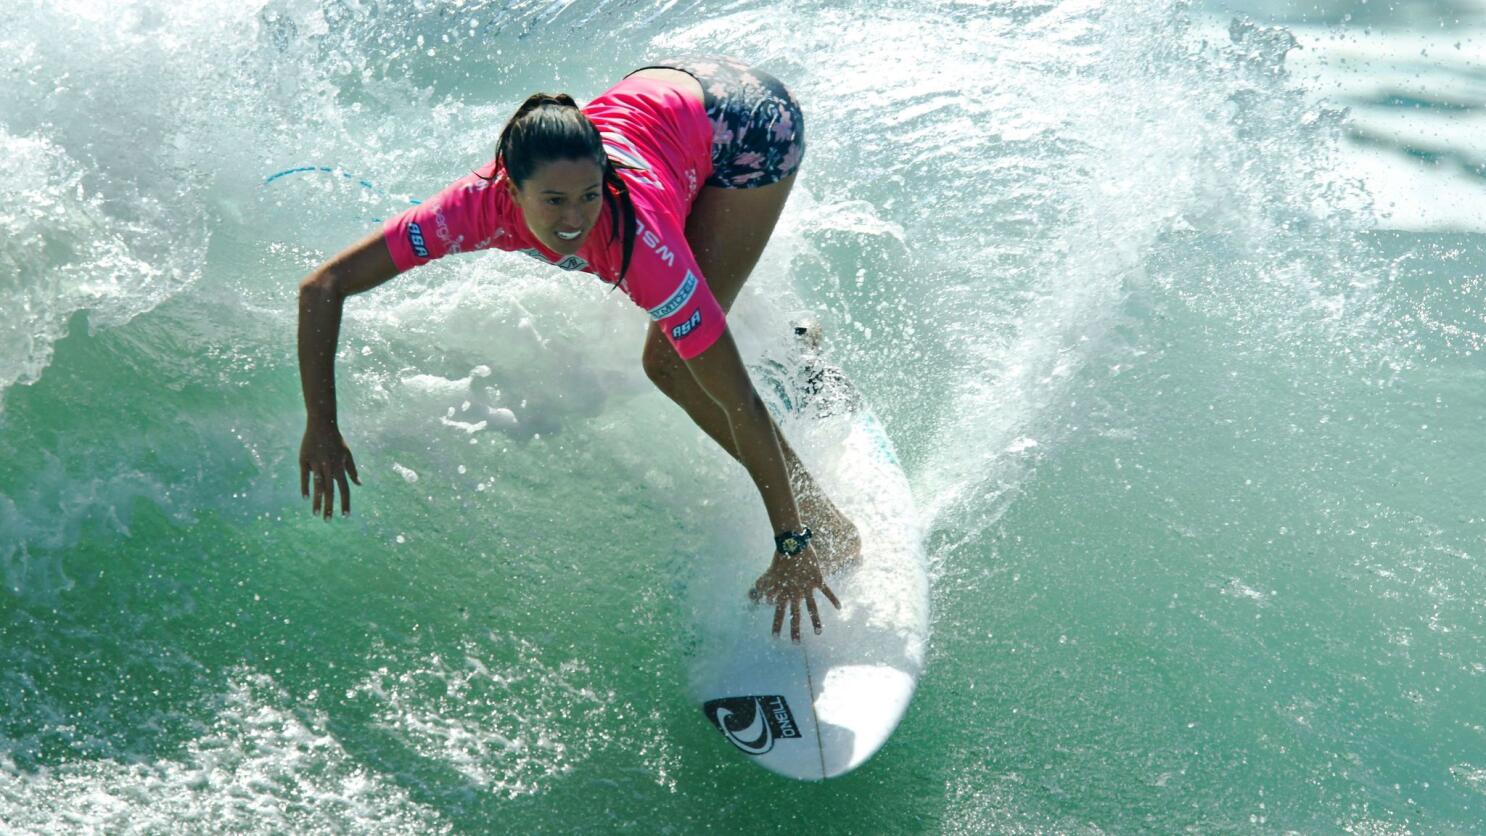 Women's Super Girl Surf Pro returns to Oceanside with first adaptive  contest - The San Diego Union-Tribune